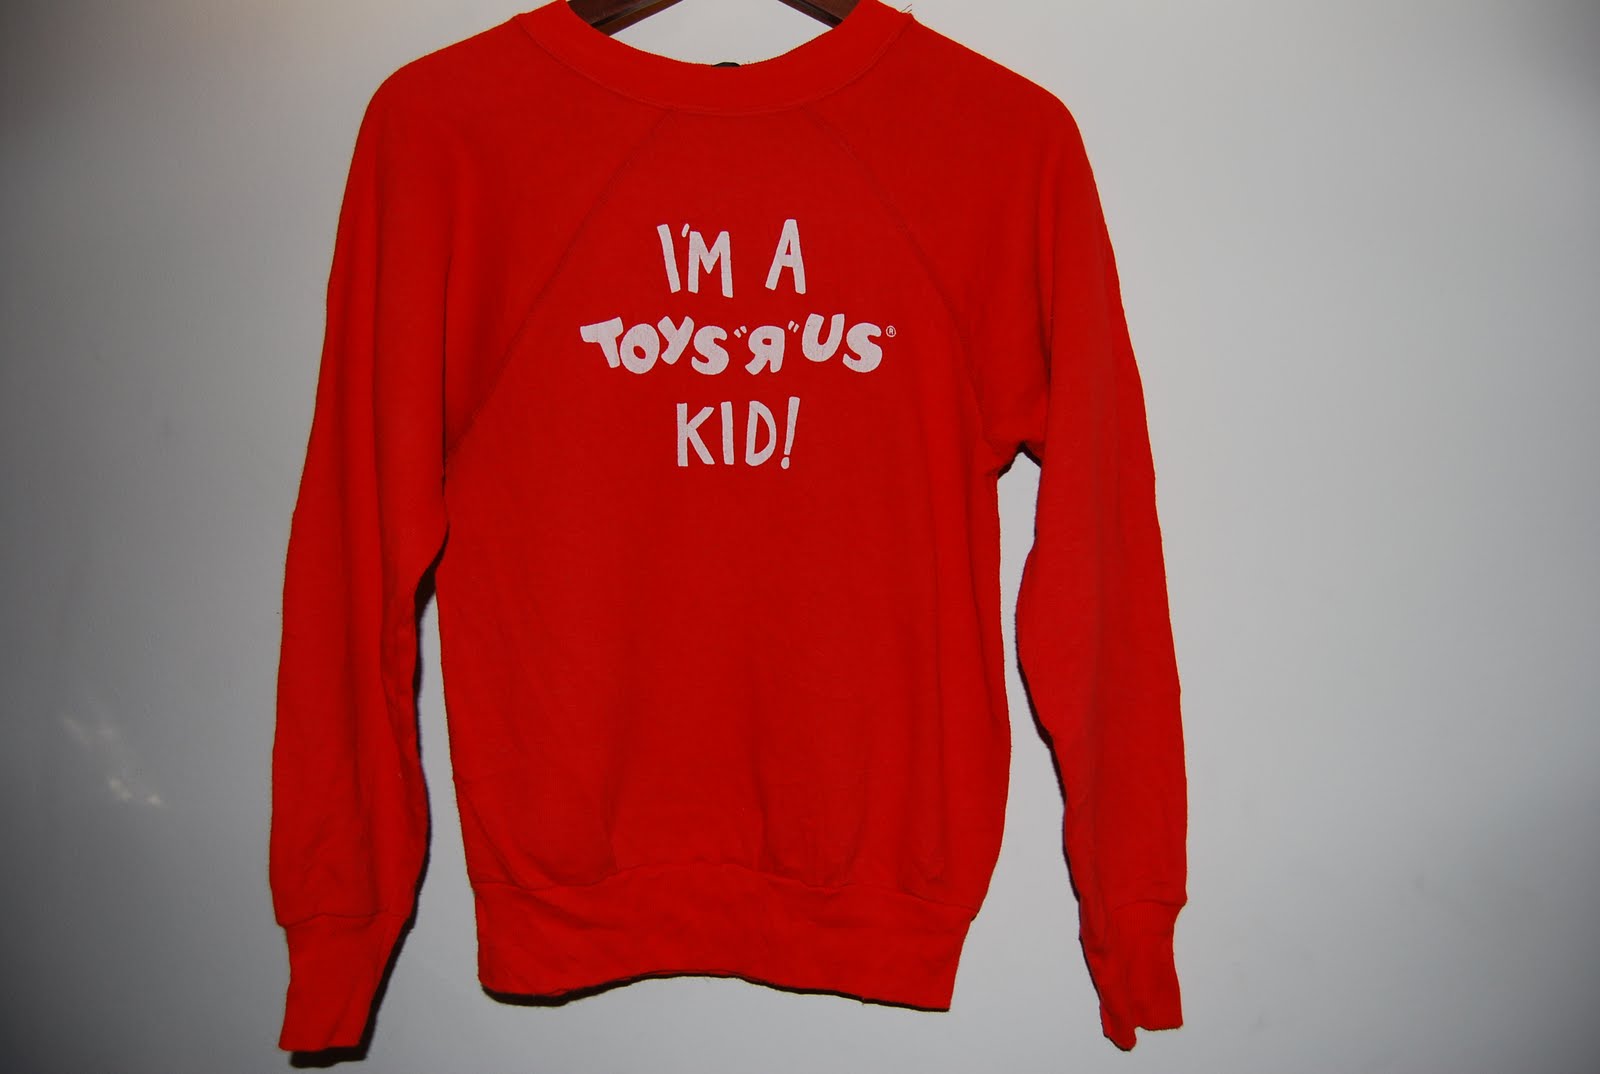 Dirty Laundry Vintage: I'm A Toys R Us Kid!